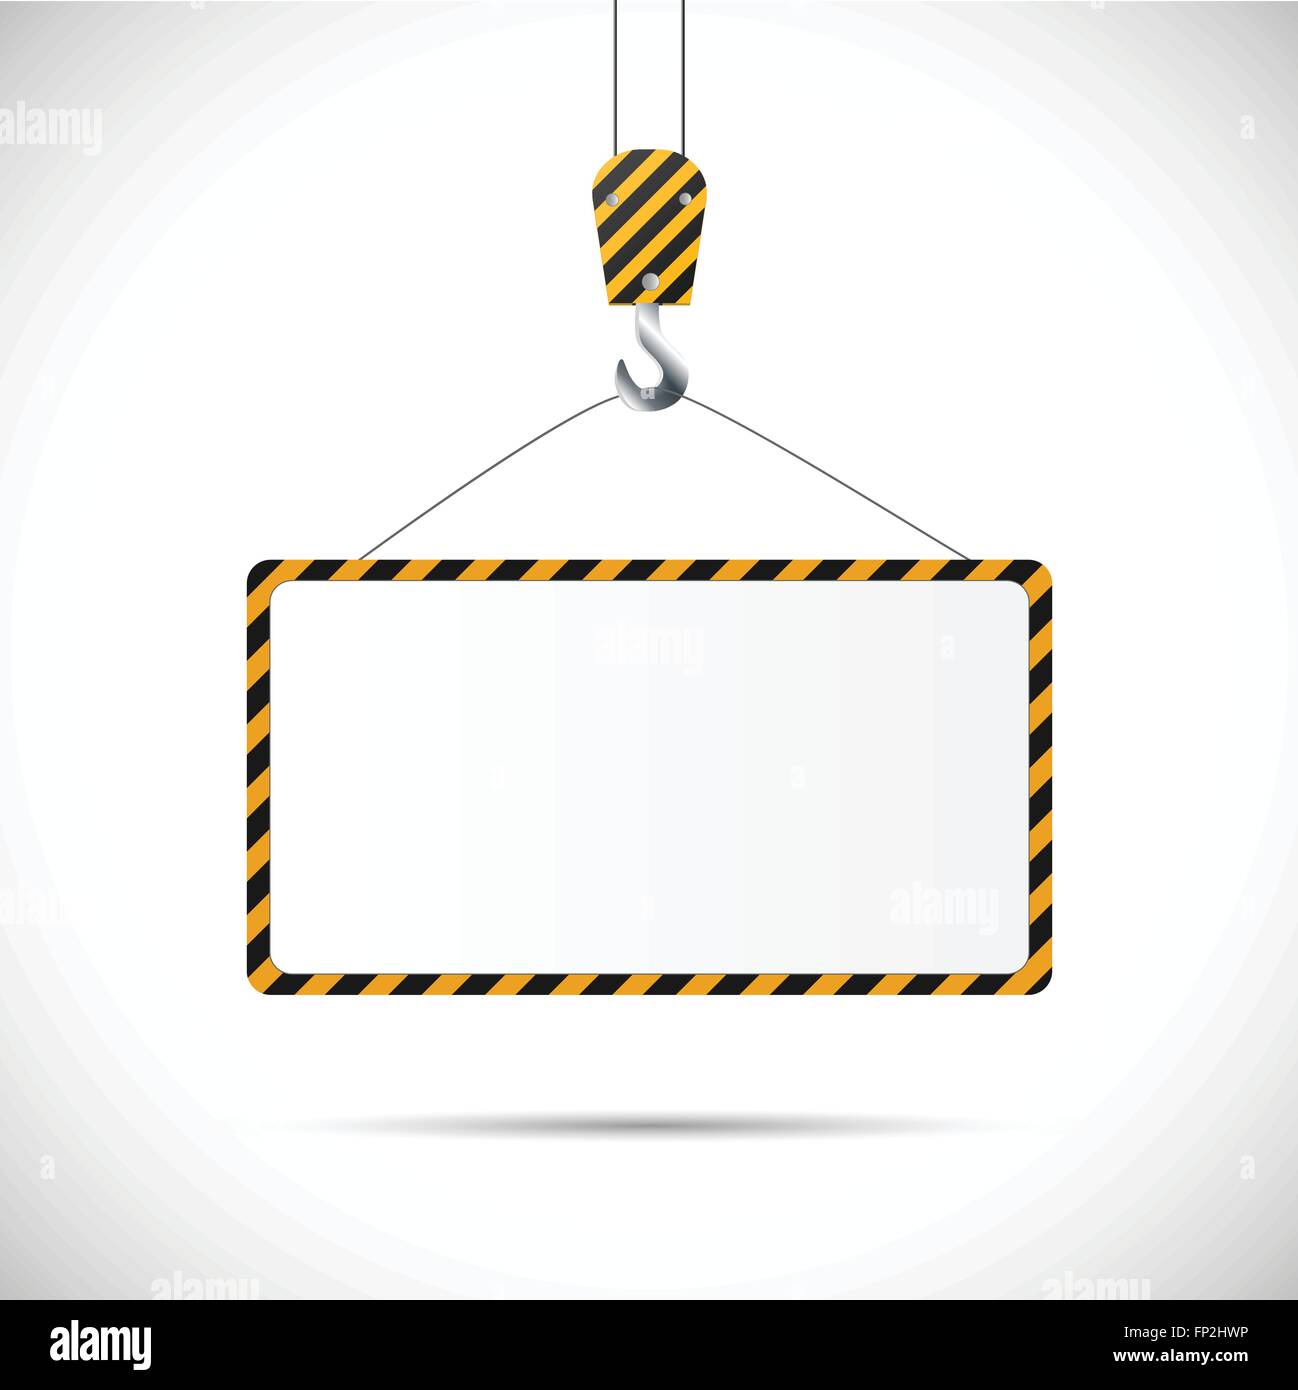 Illustration of a construction road sign isolated on a white background. Stock Vector